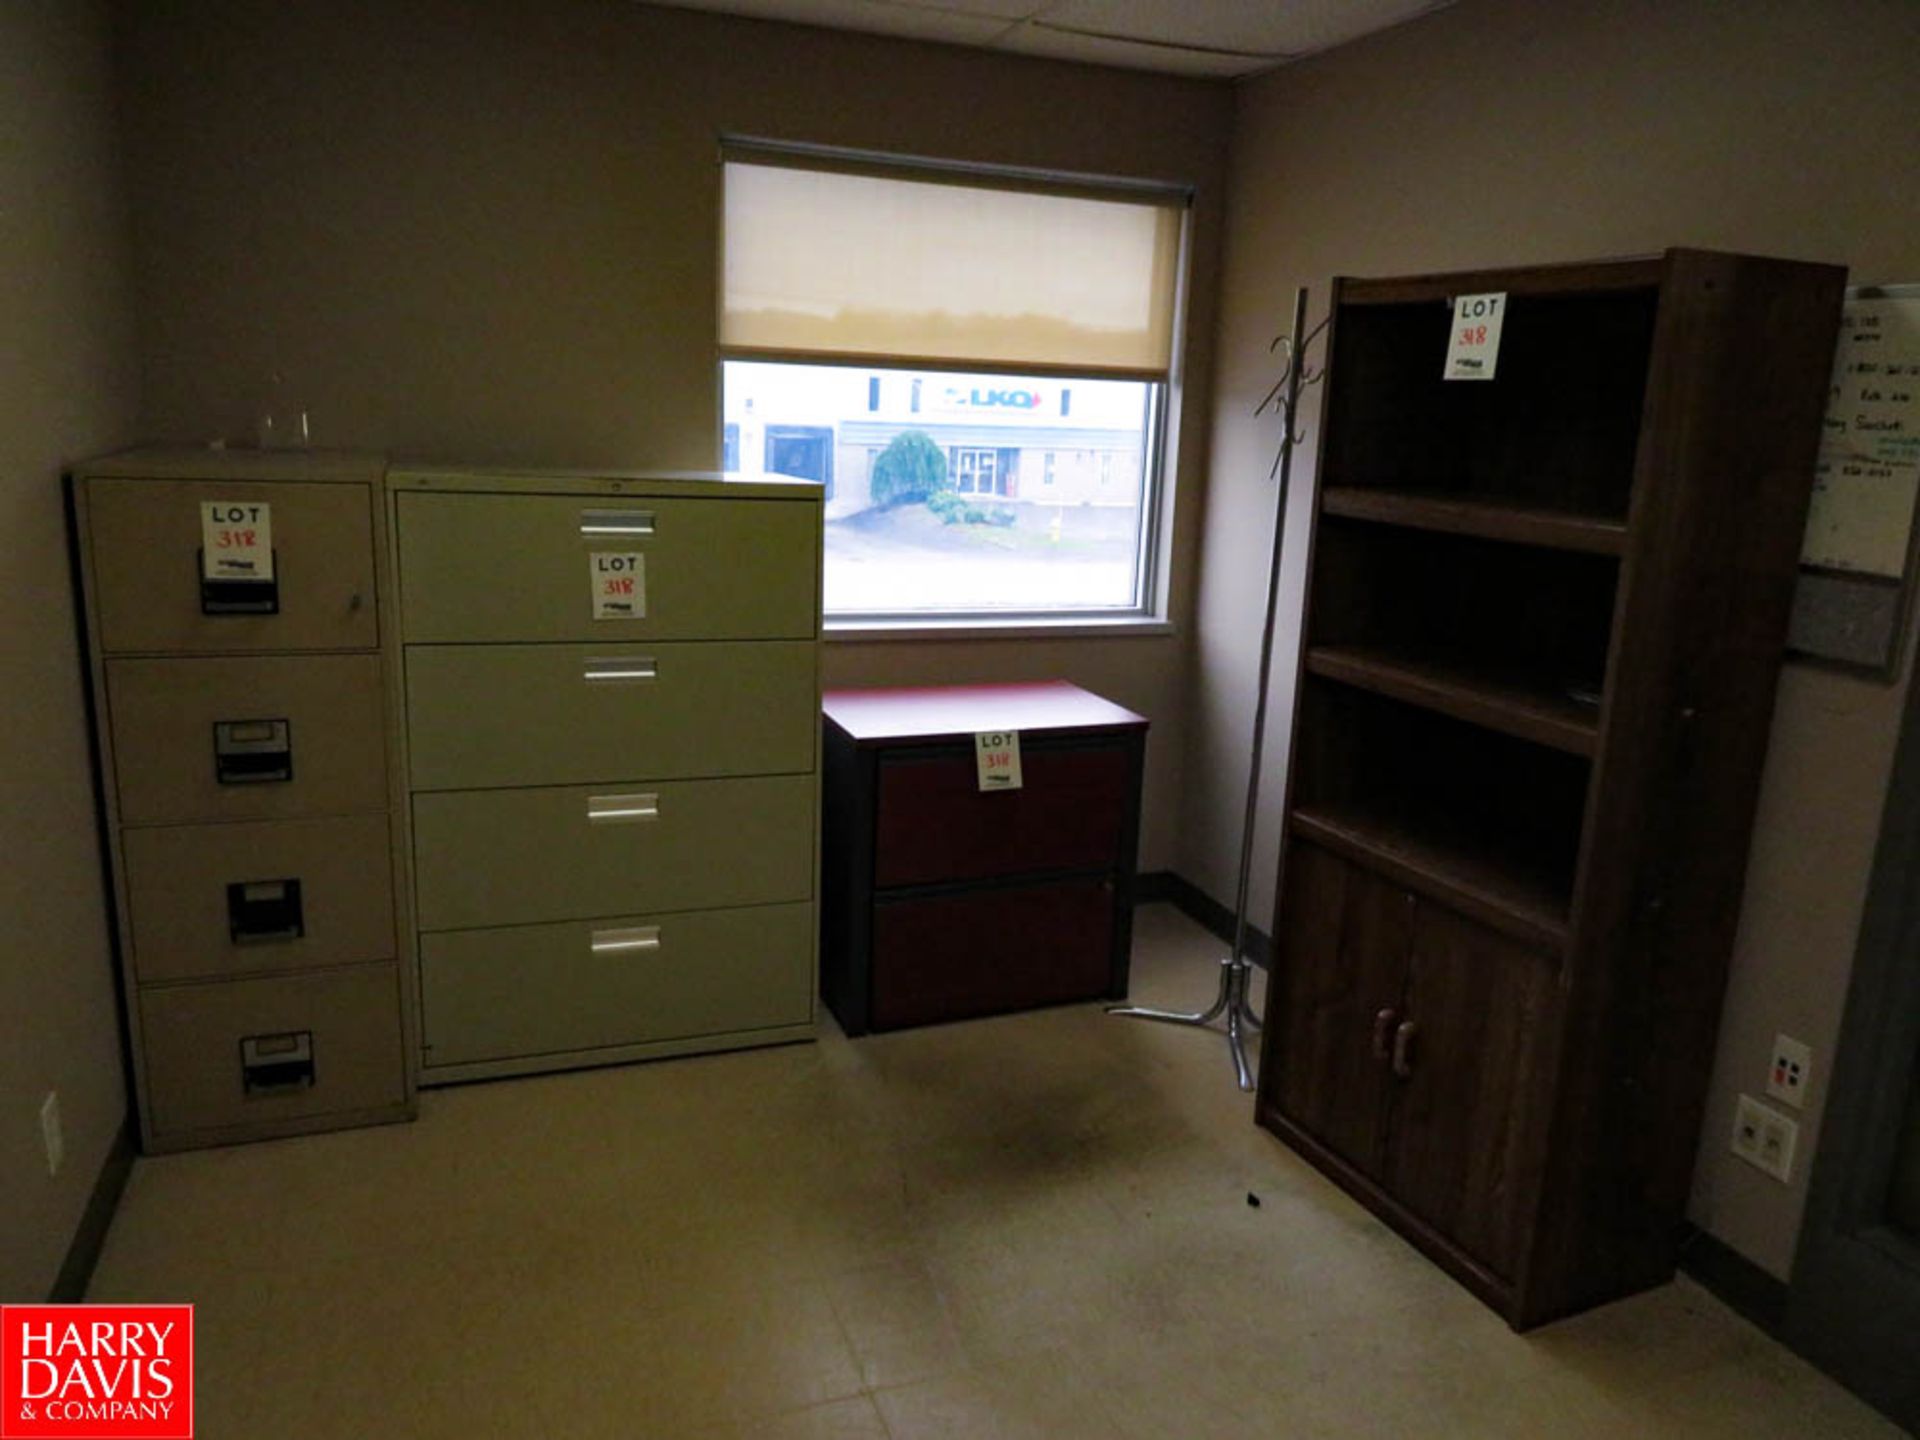 Filing Cabinets and Book Shelf Rigging Fee: $70